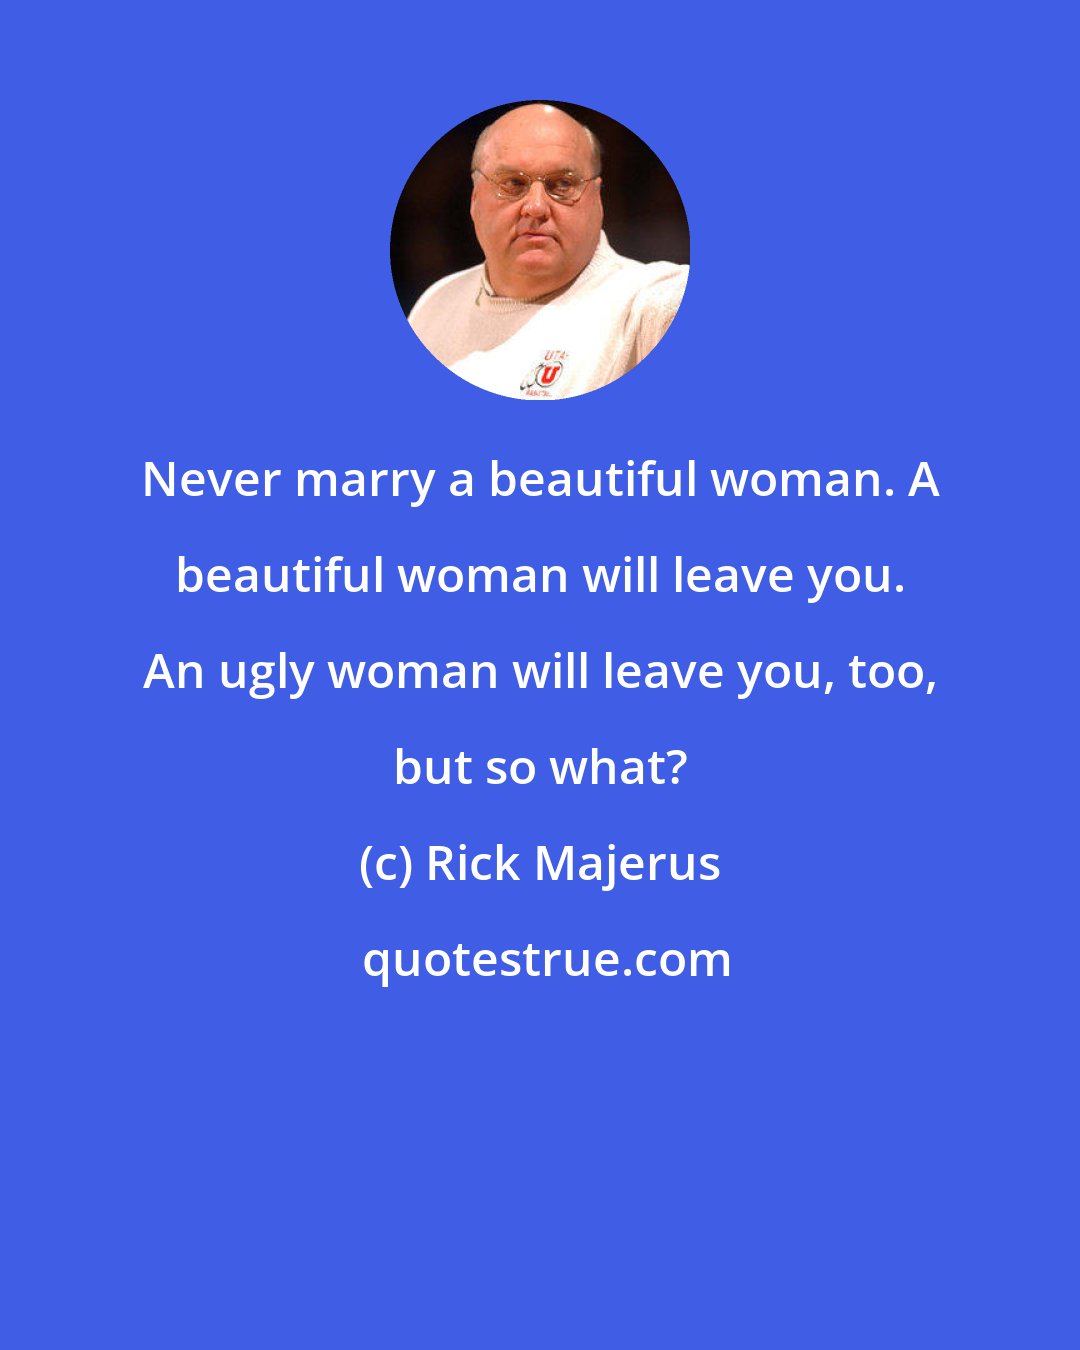 Rick Majerus: Never marry a beautiful woman. A beautiful woman will leave you. An ugly woman will leave you, too, but so what?